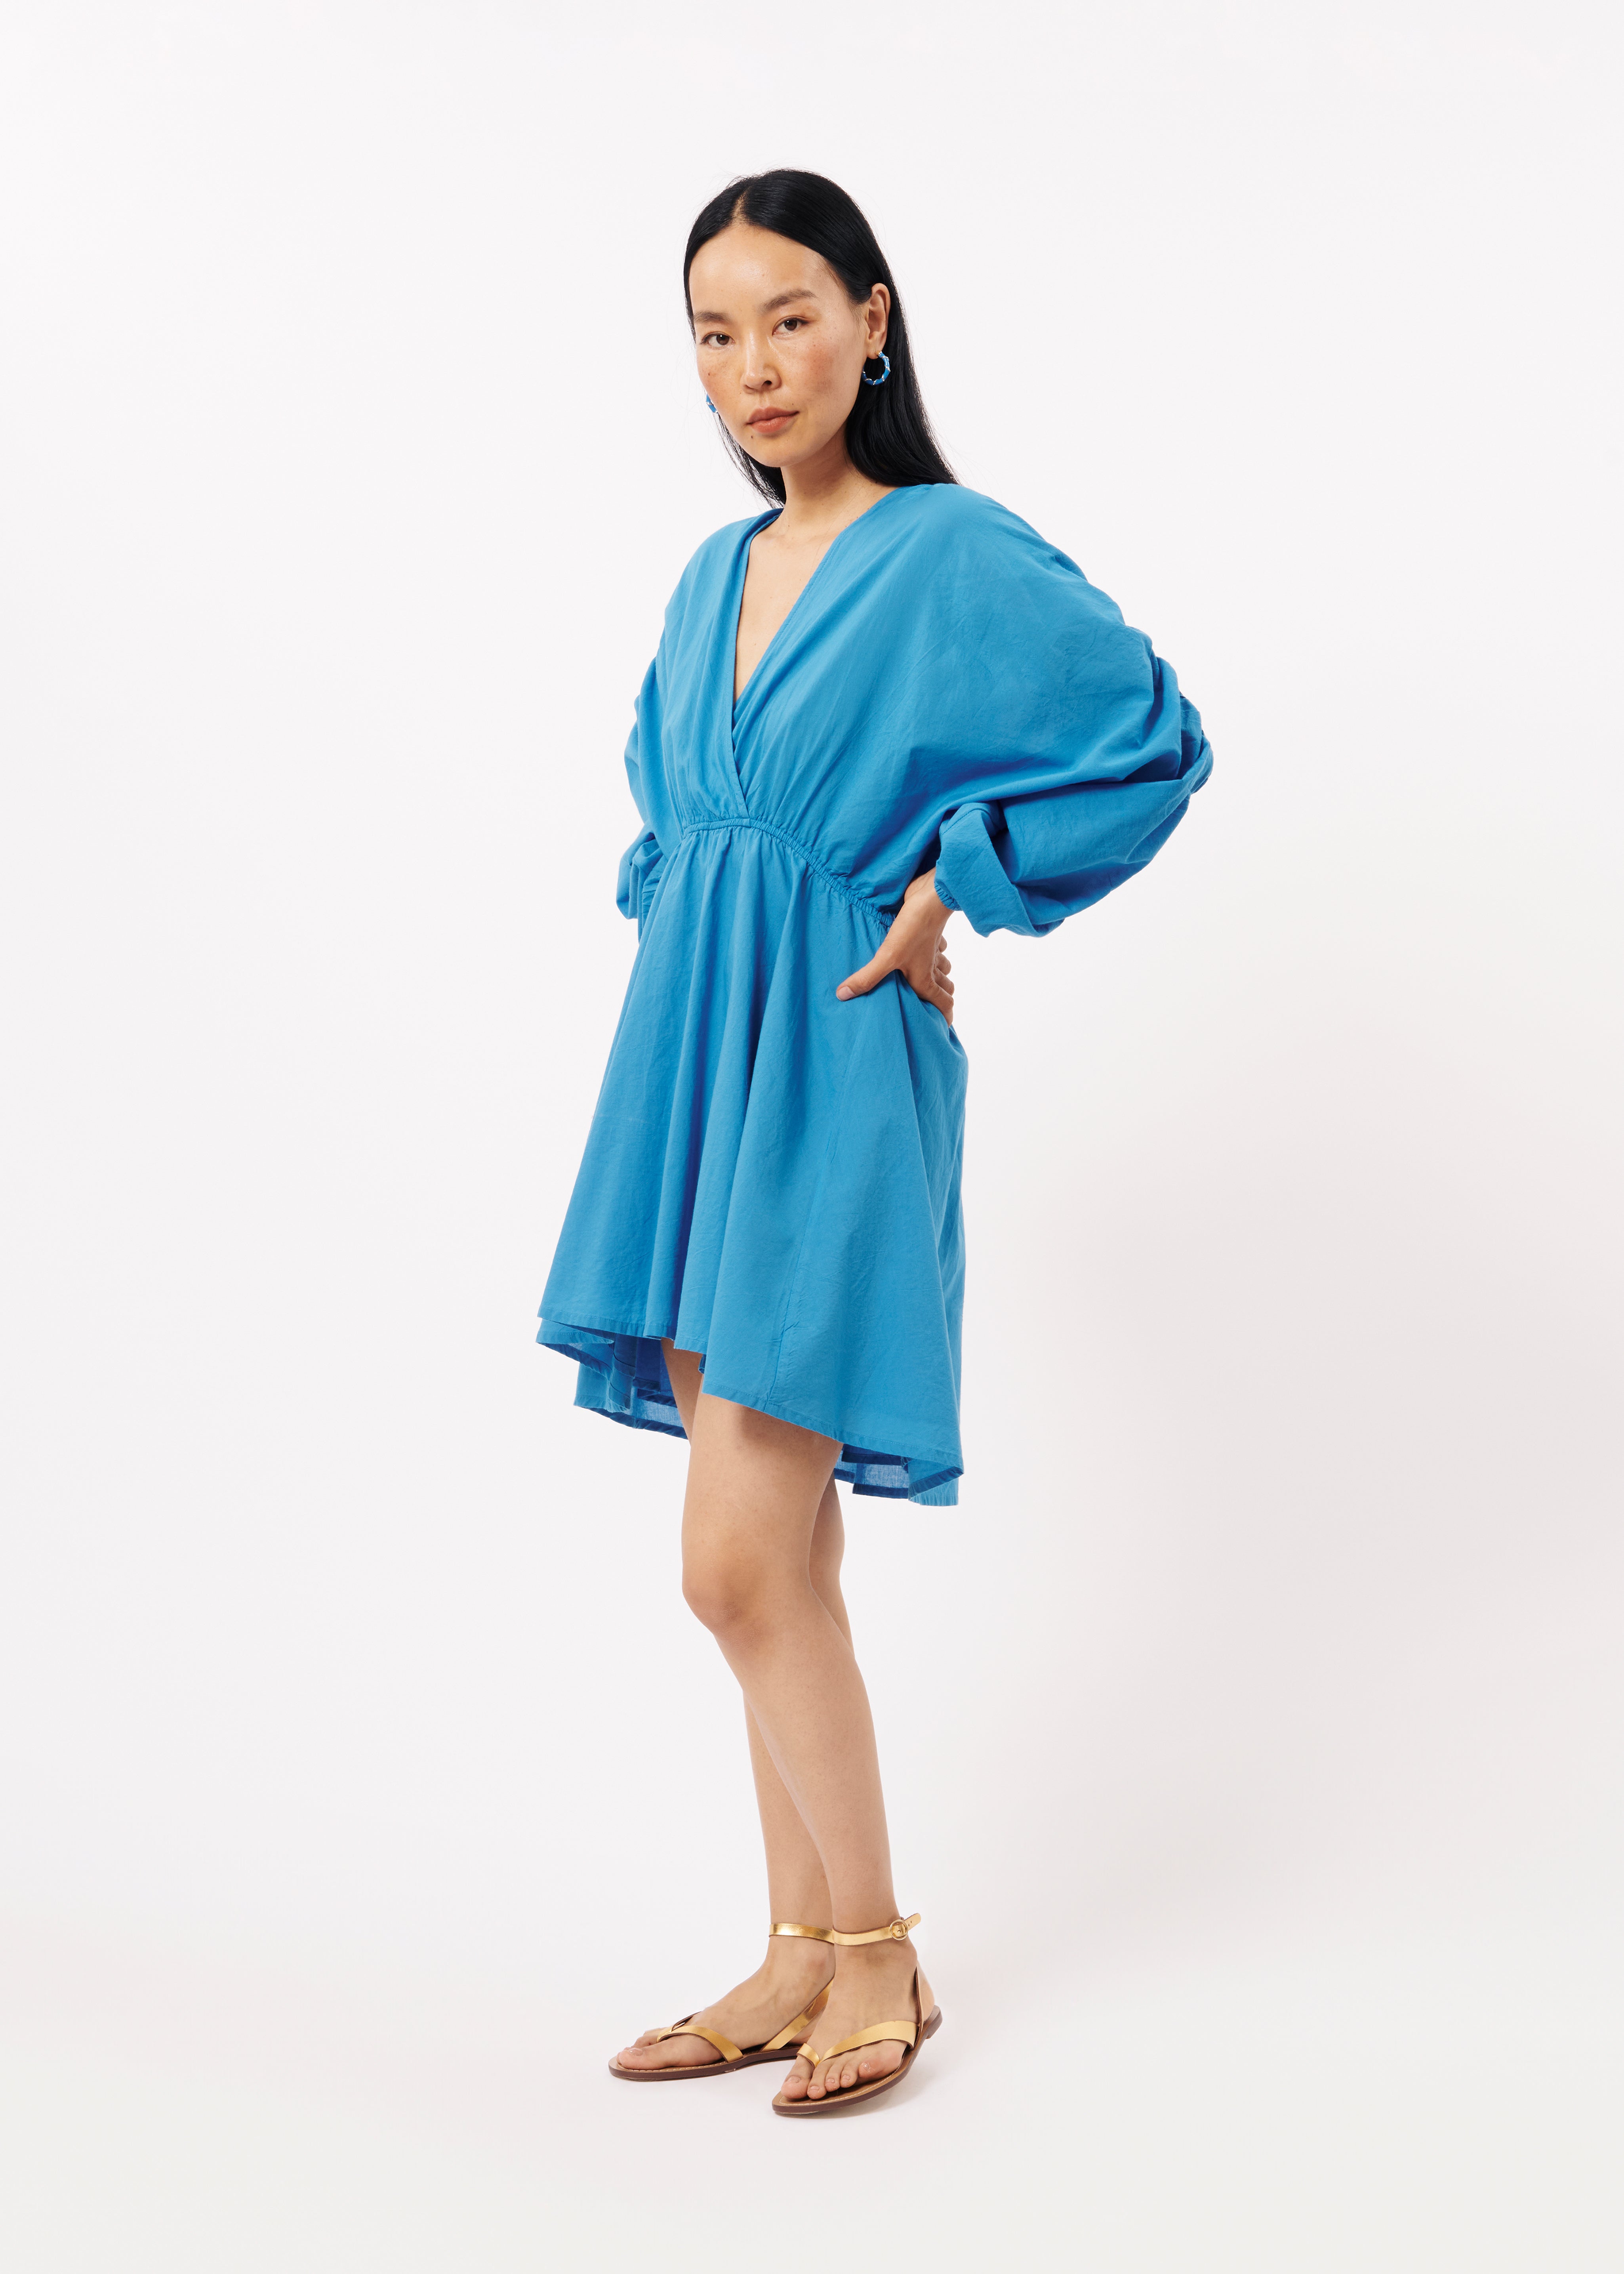 ANDREAS dress Electric blue